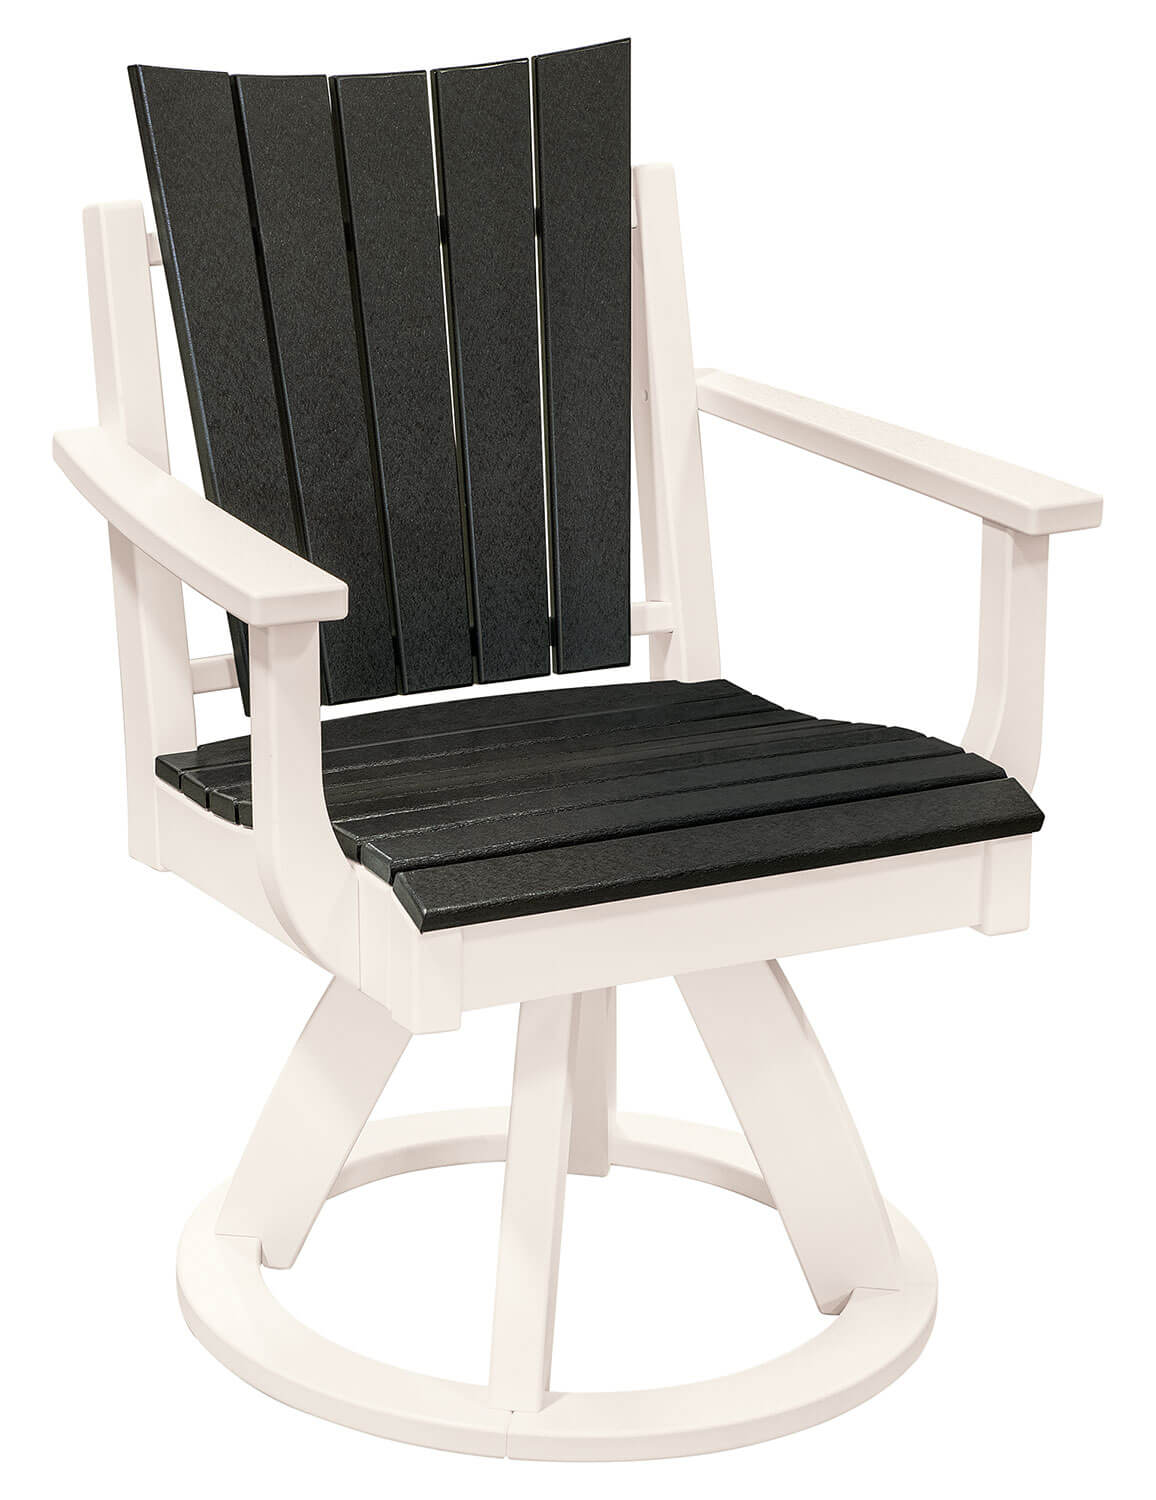 EC Woods Shawnee Contemporary Outdoor Poly Dining Height Swivel Chair Shown in Black and Bright White